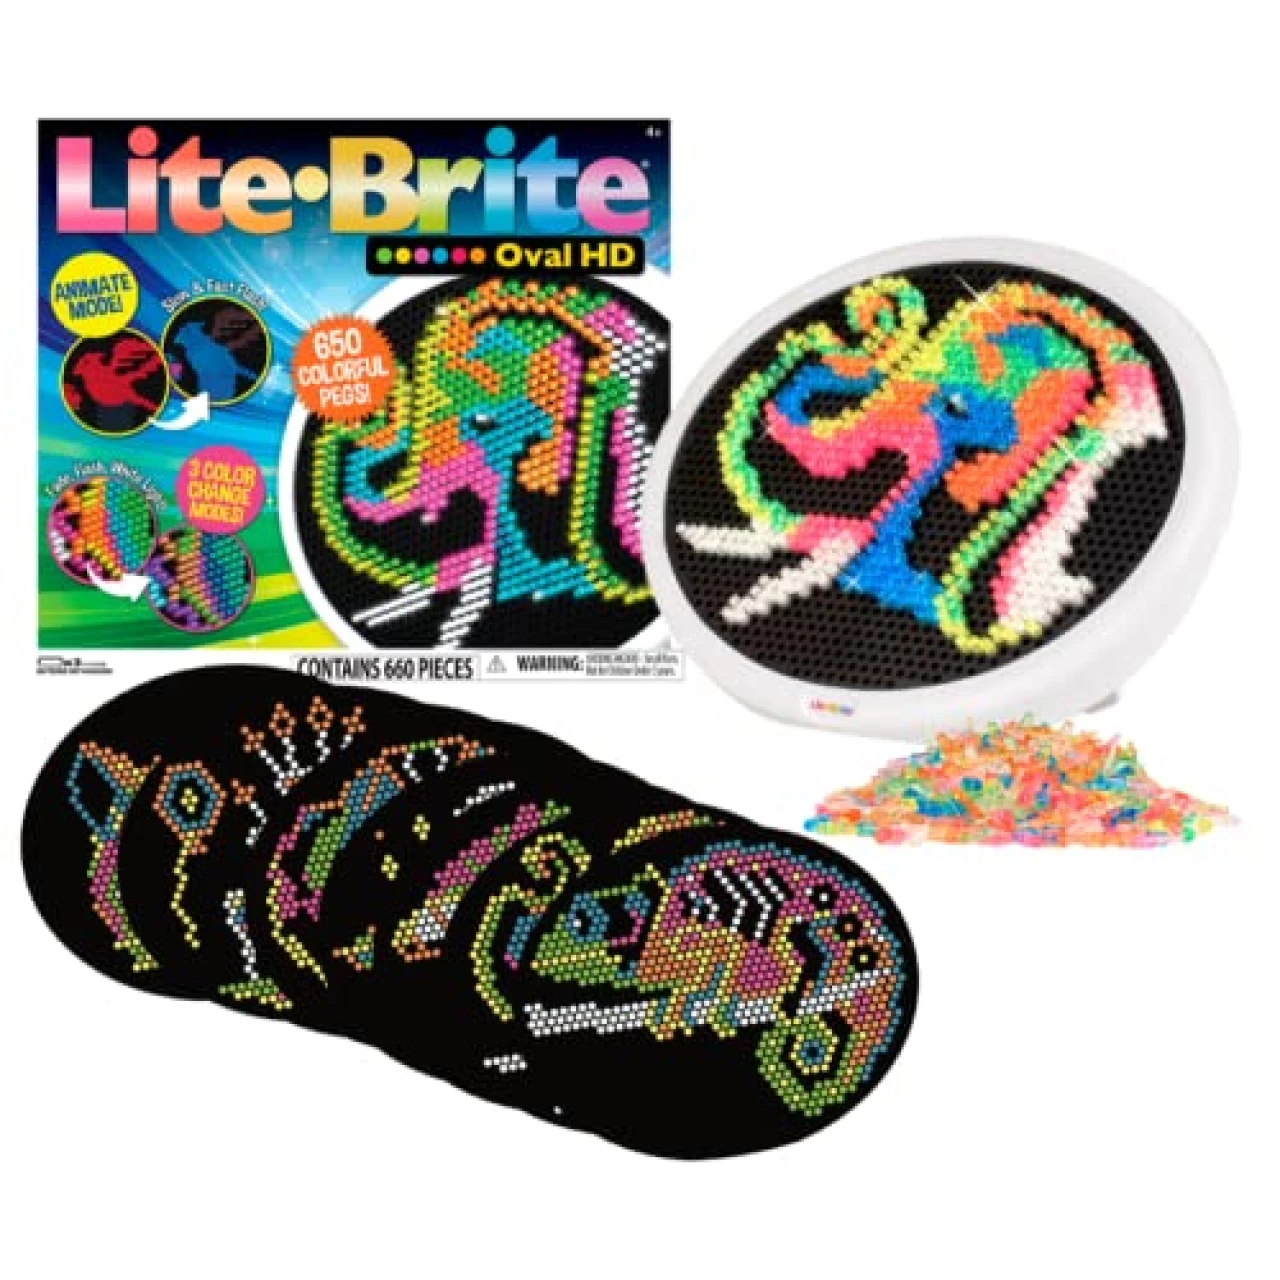 Lite Brite Oval High Definition - Light Up Toy – 650 Mini Pegs, 8 HD Design Templates